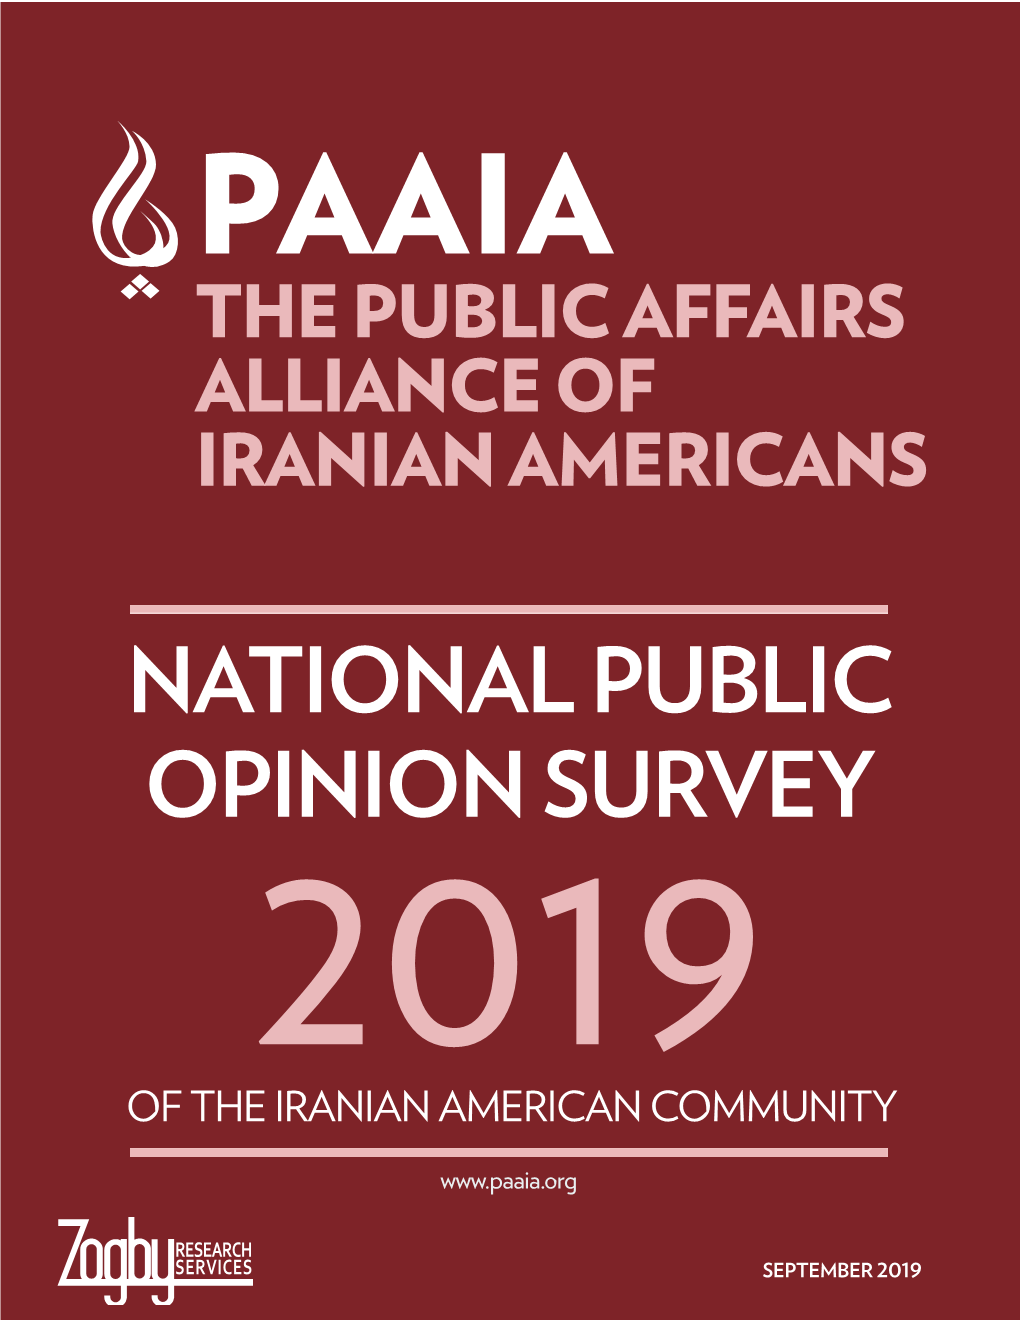 2019 Survey, the Issues of Most Importance to Iranian American Respondents Reflect the Current Political U.S.-Iran Relations Are Most Important